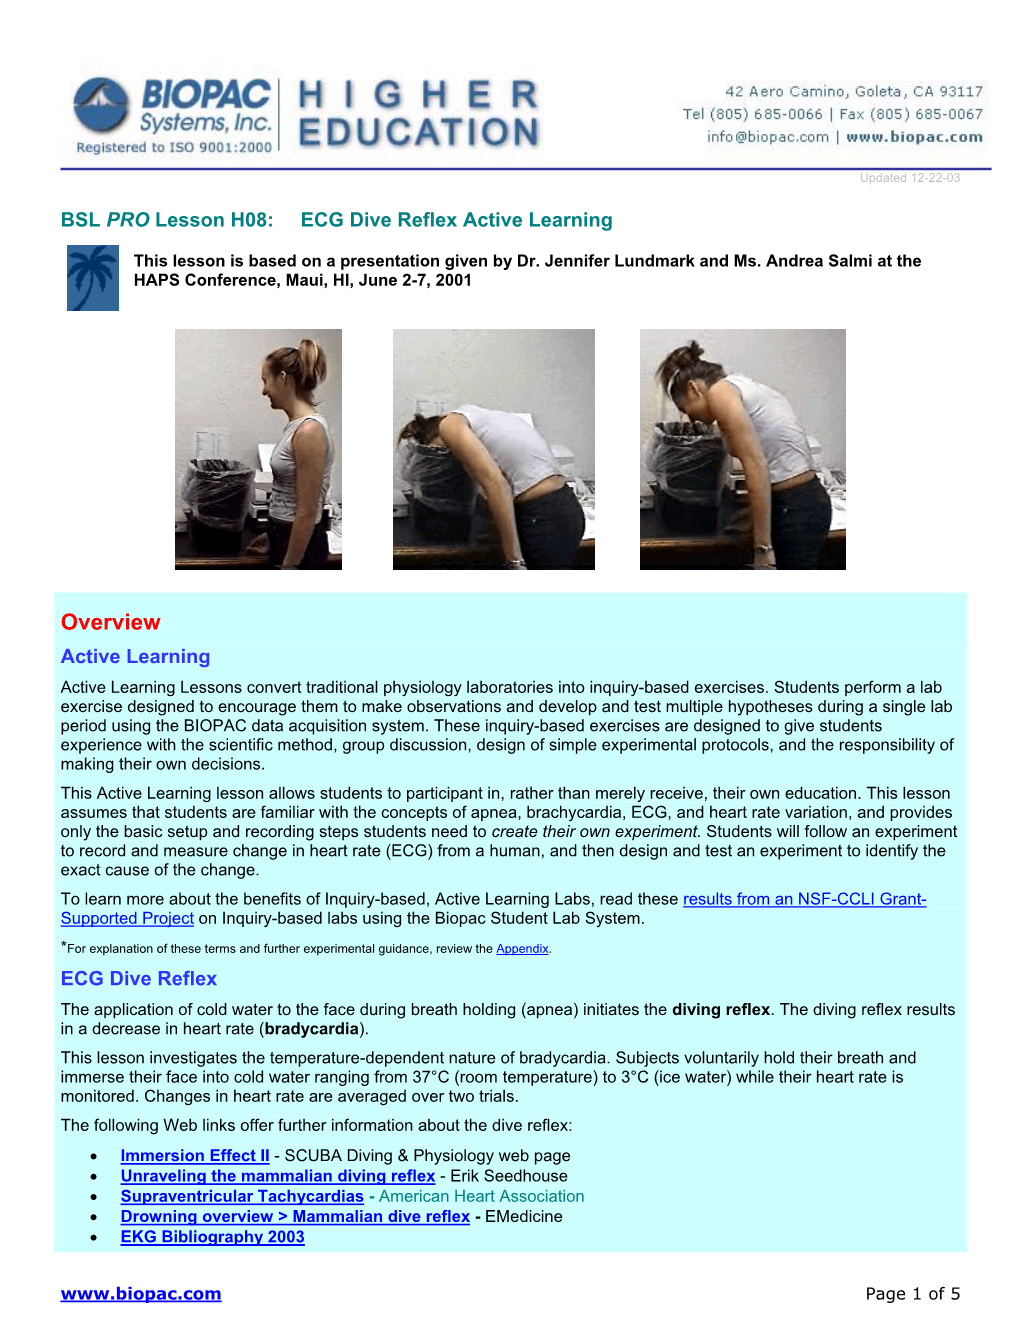 BSL PRO Lesson H08: ECG Dive Reflex Active Learning